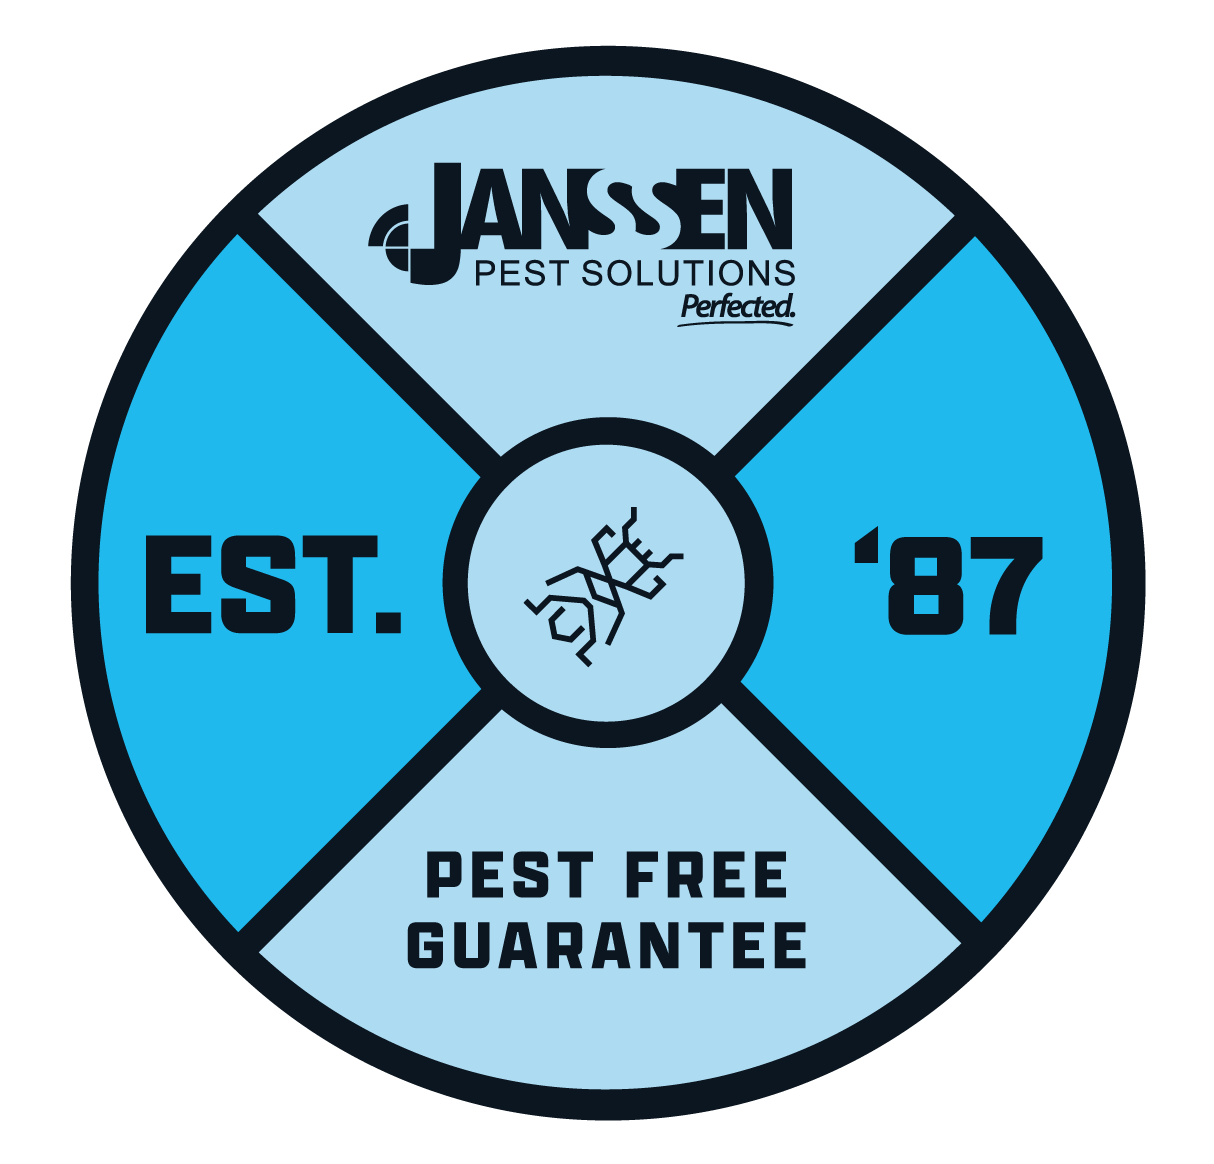 Janssen Pest Solutions icon saying established in 1987 & Pest Free Guarantee.